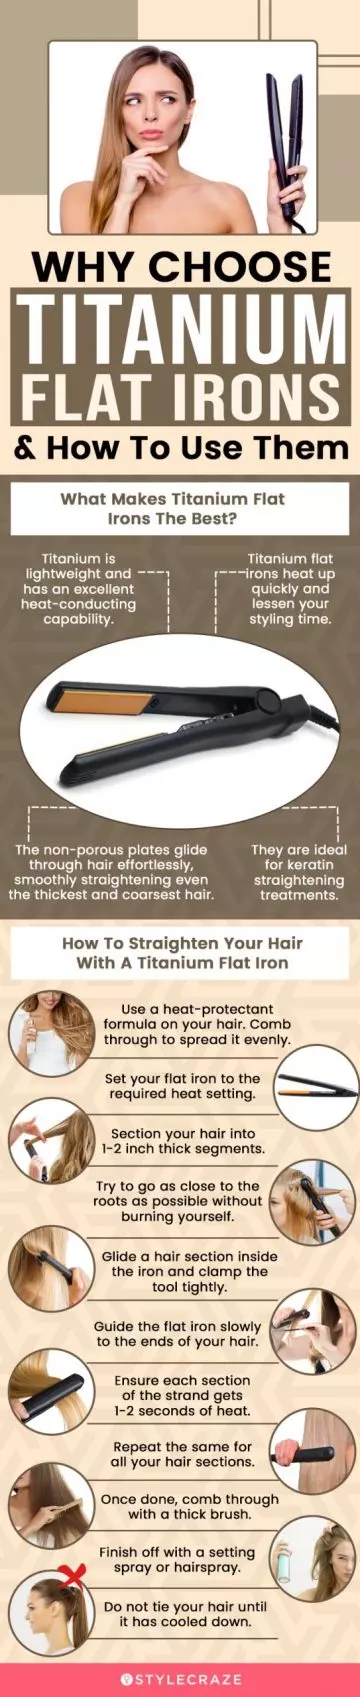 Why Choose Titanium Flat Irons & How To Use Them